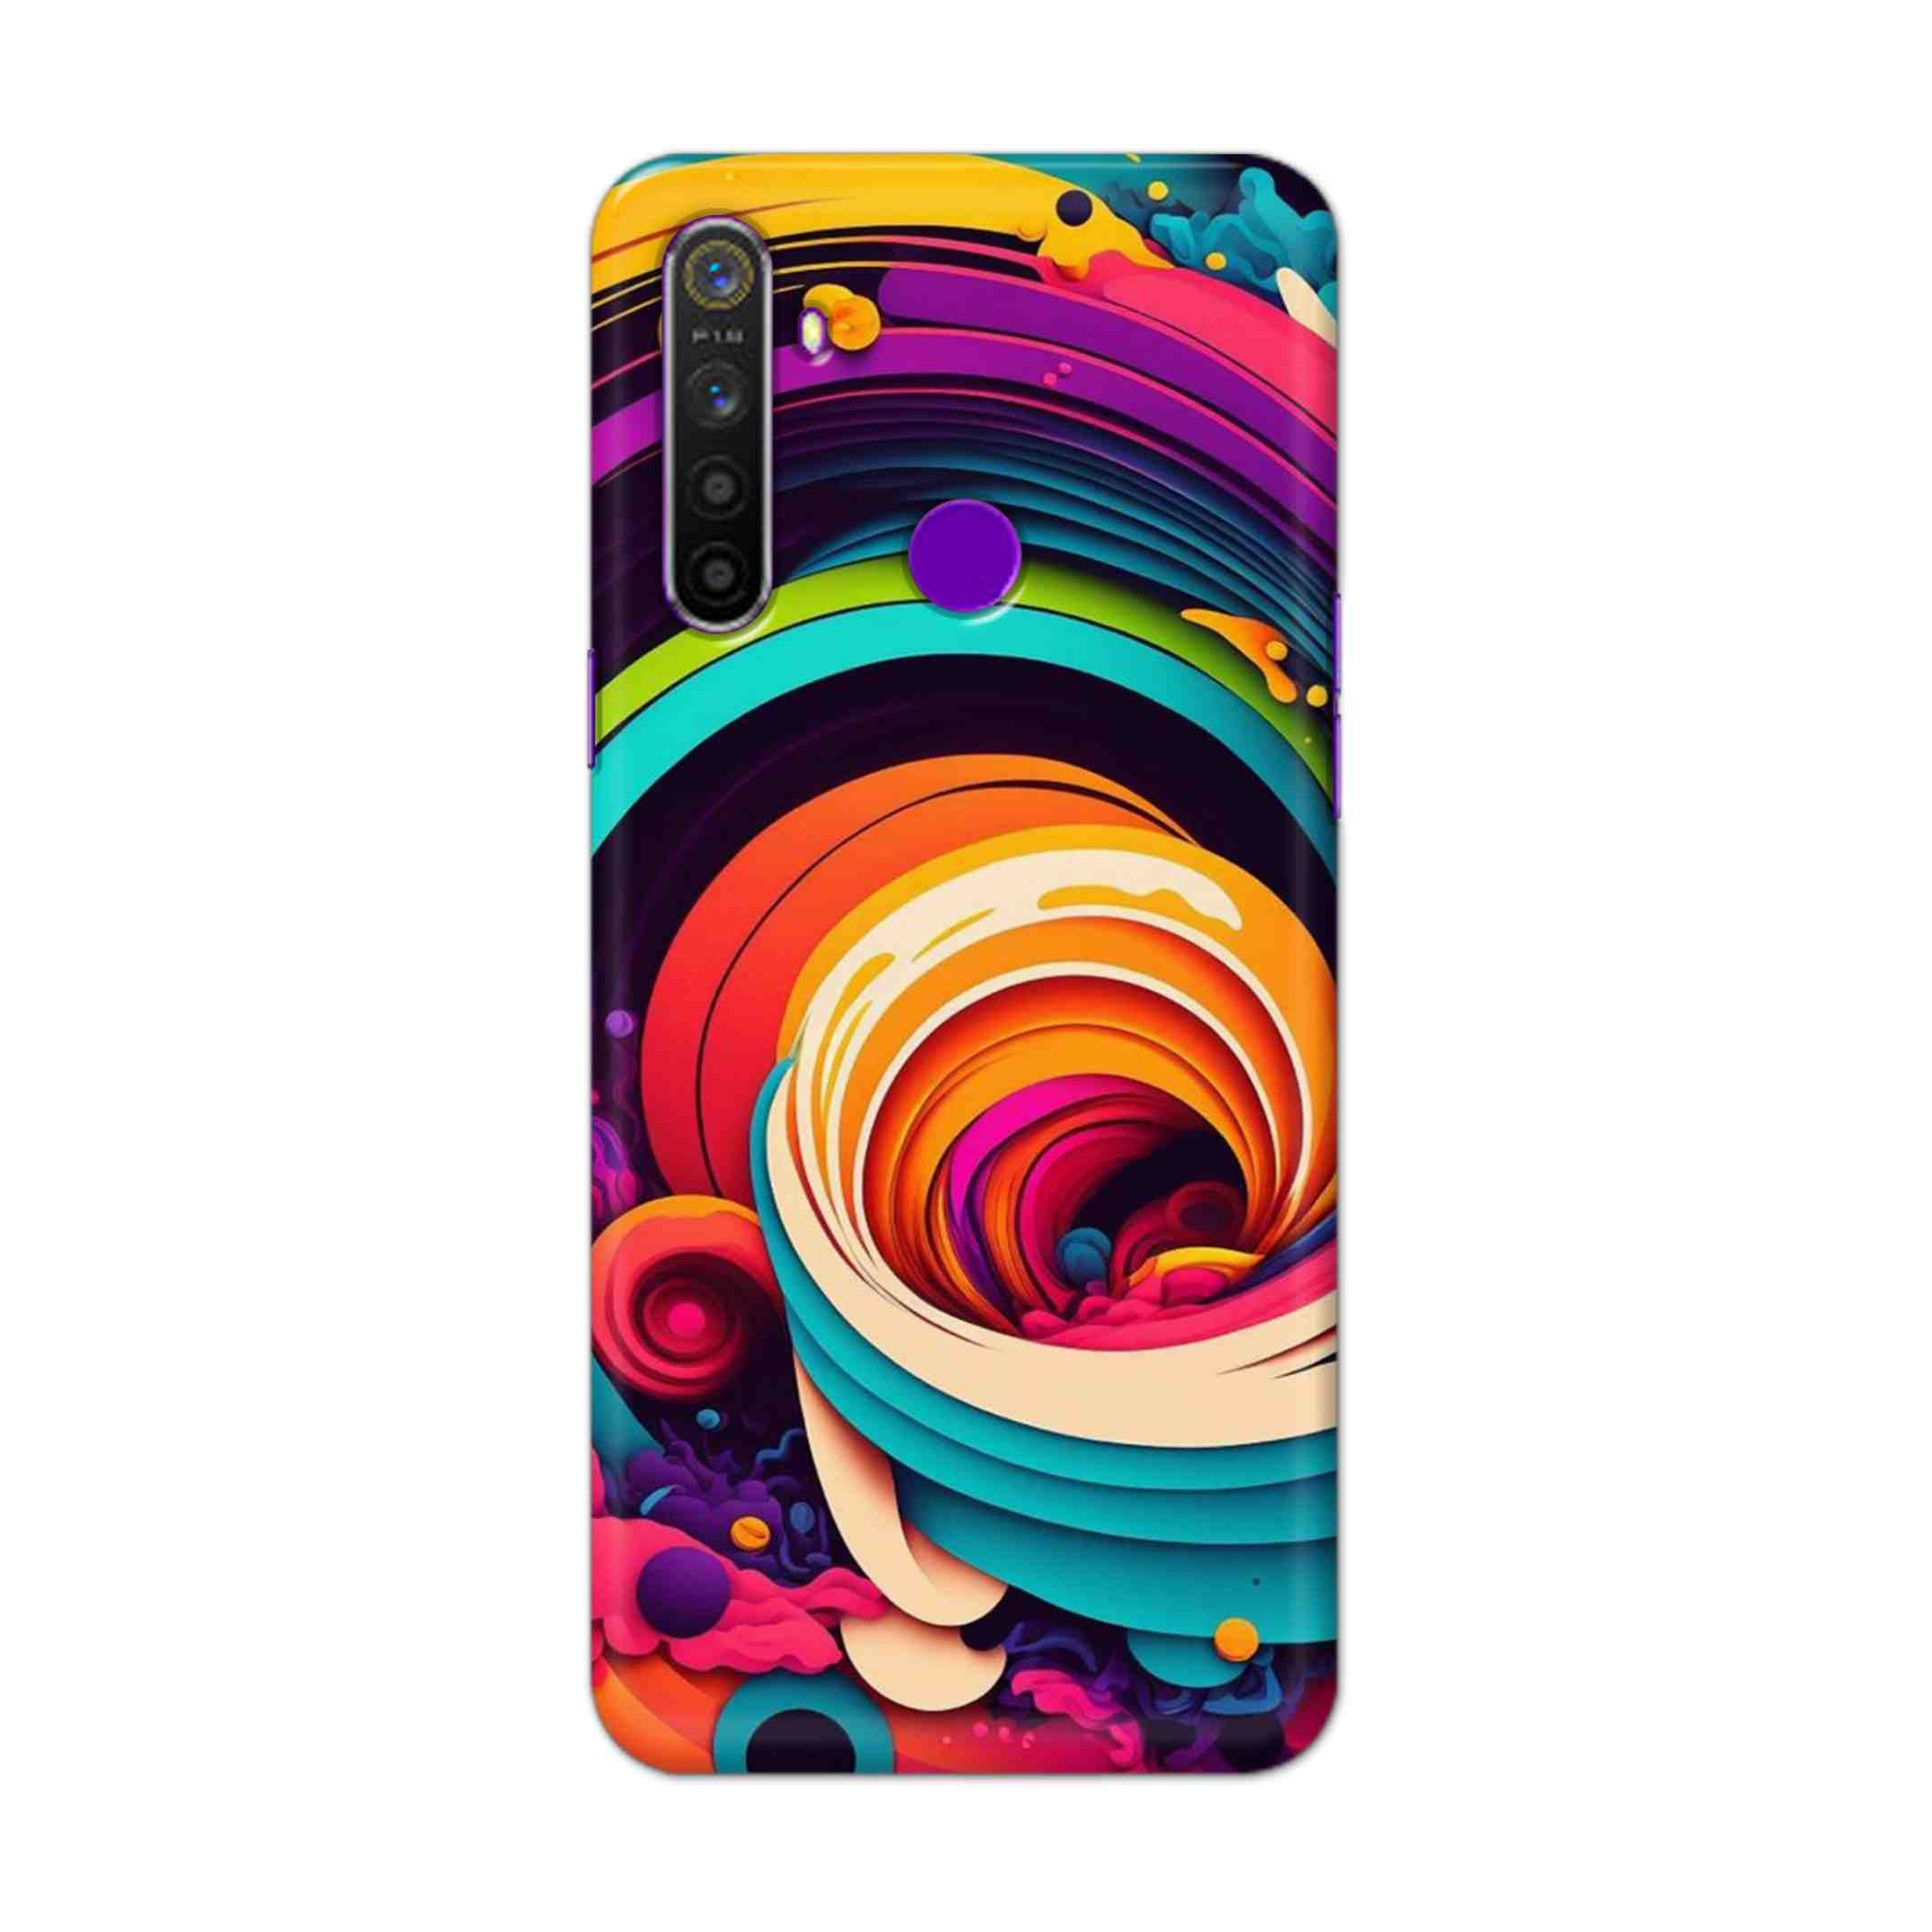 Buy Colour Circle Hard Back Mobile Phone Case Cover For Realme 5 Online